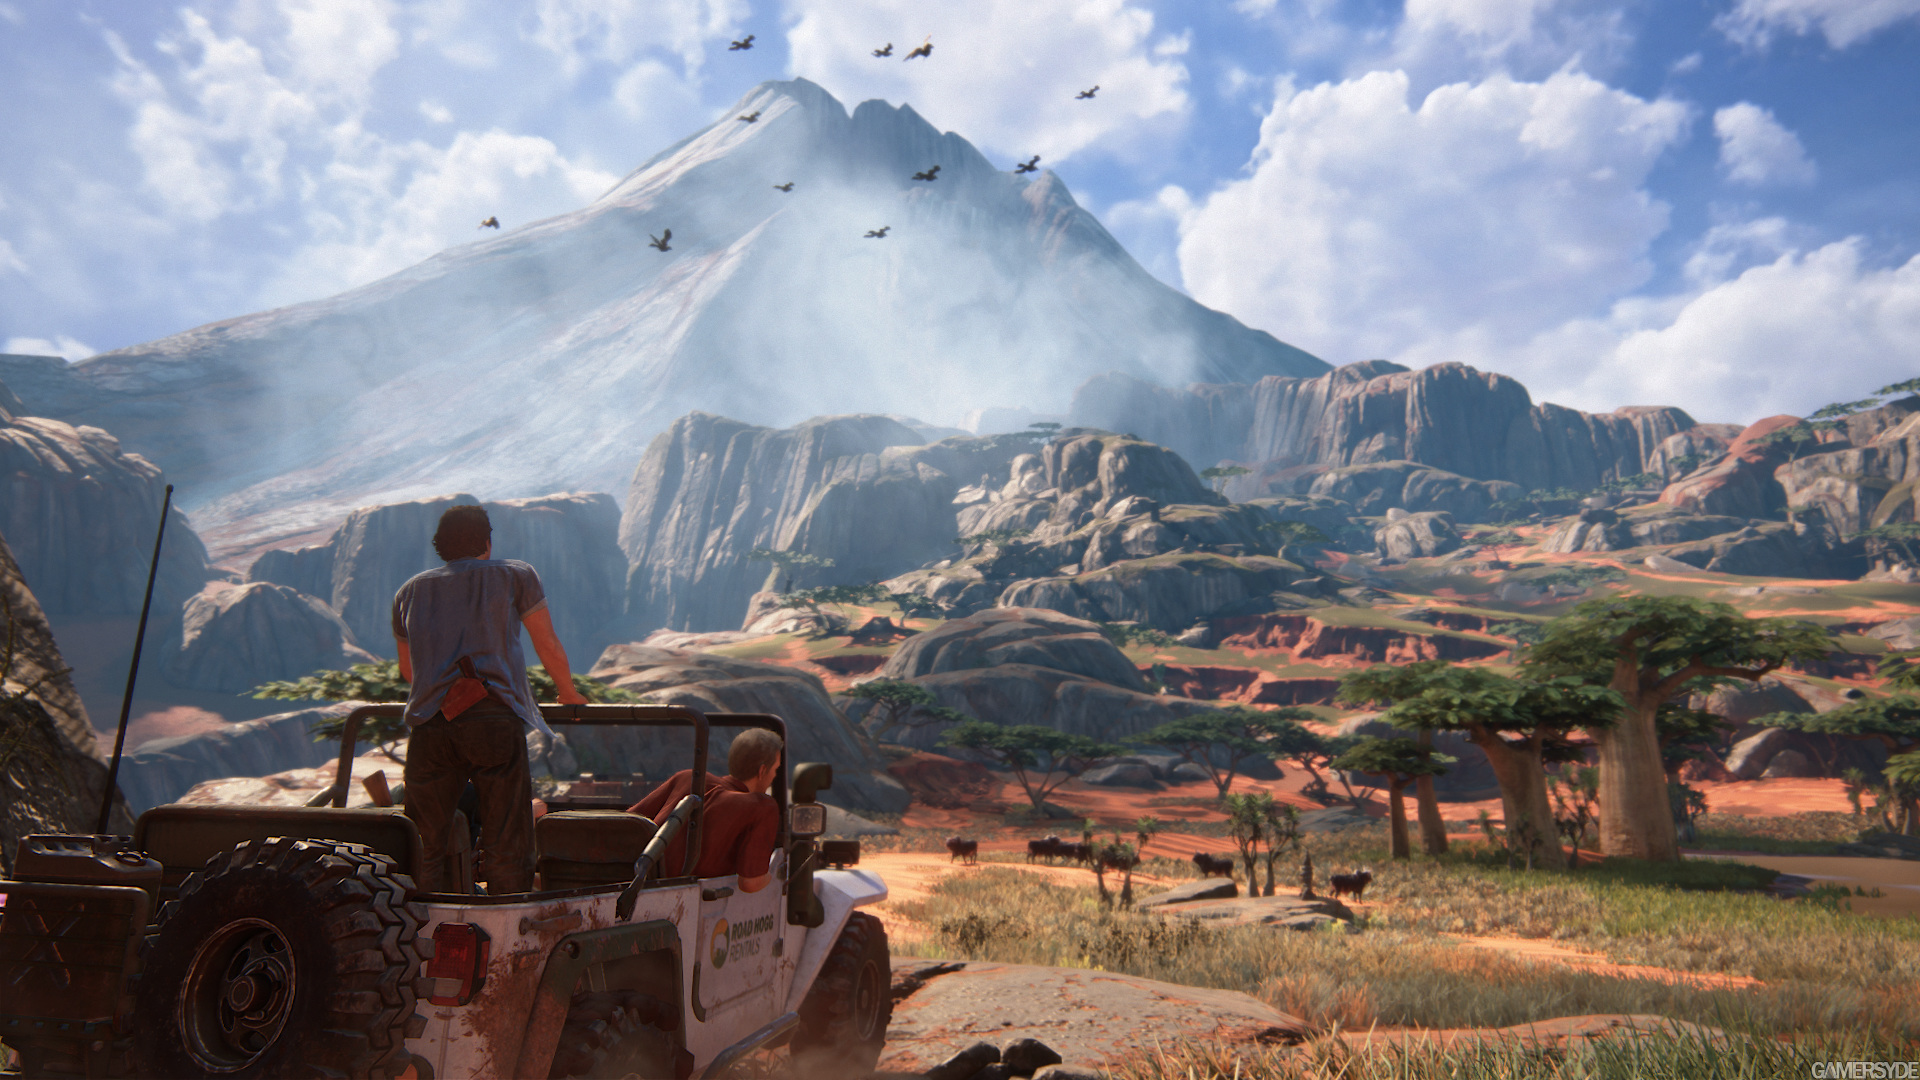 Uncharted 4: Gameplay Trailer - Gamersyde